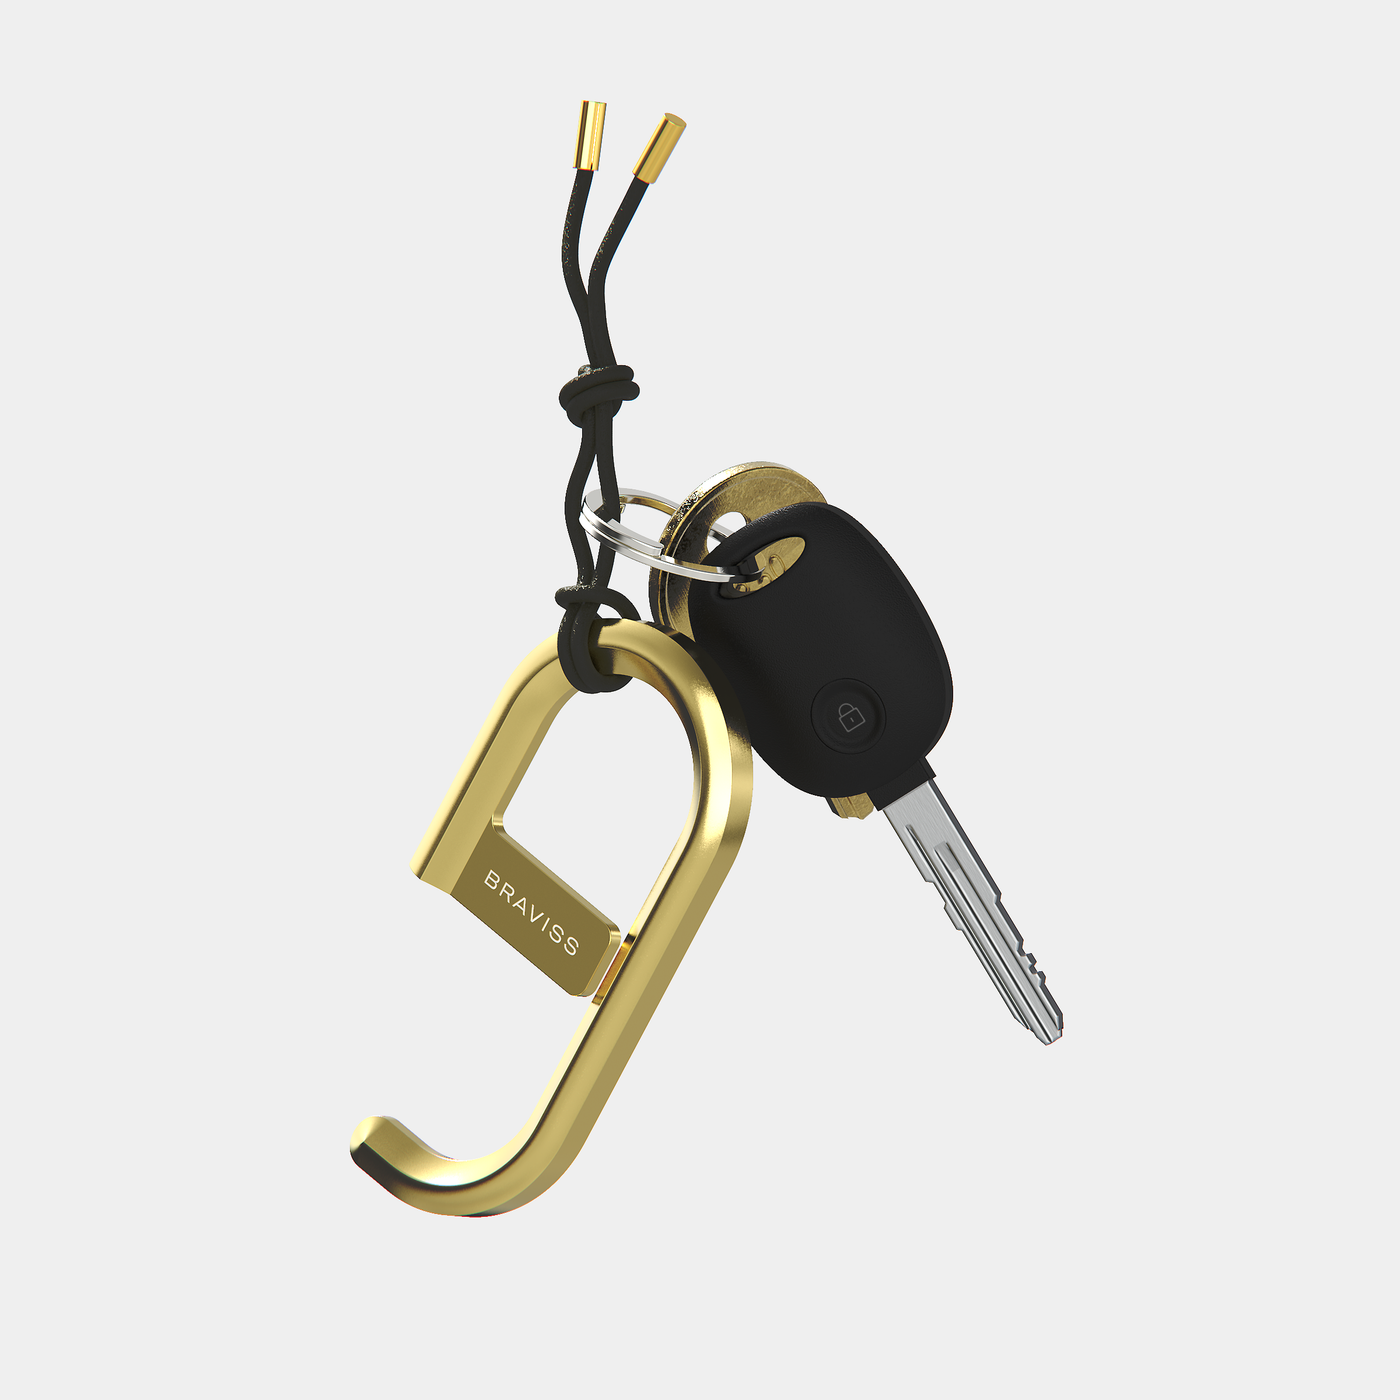 BRAVISS Brass Keychain Touch Tool and Leather Fob String. 2 Keys, one car key, the other a bronze house key, linked by a ring. The ring is tied to the leather fob string.